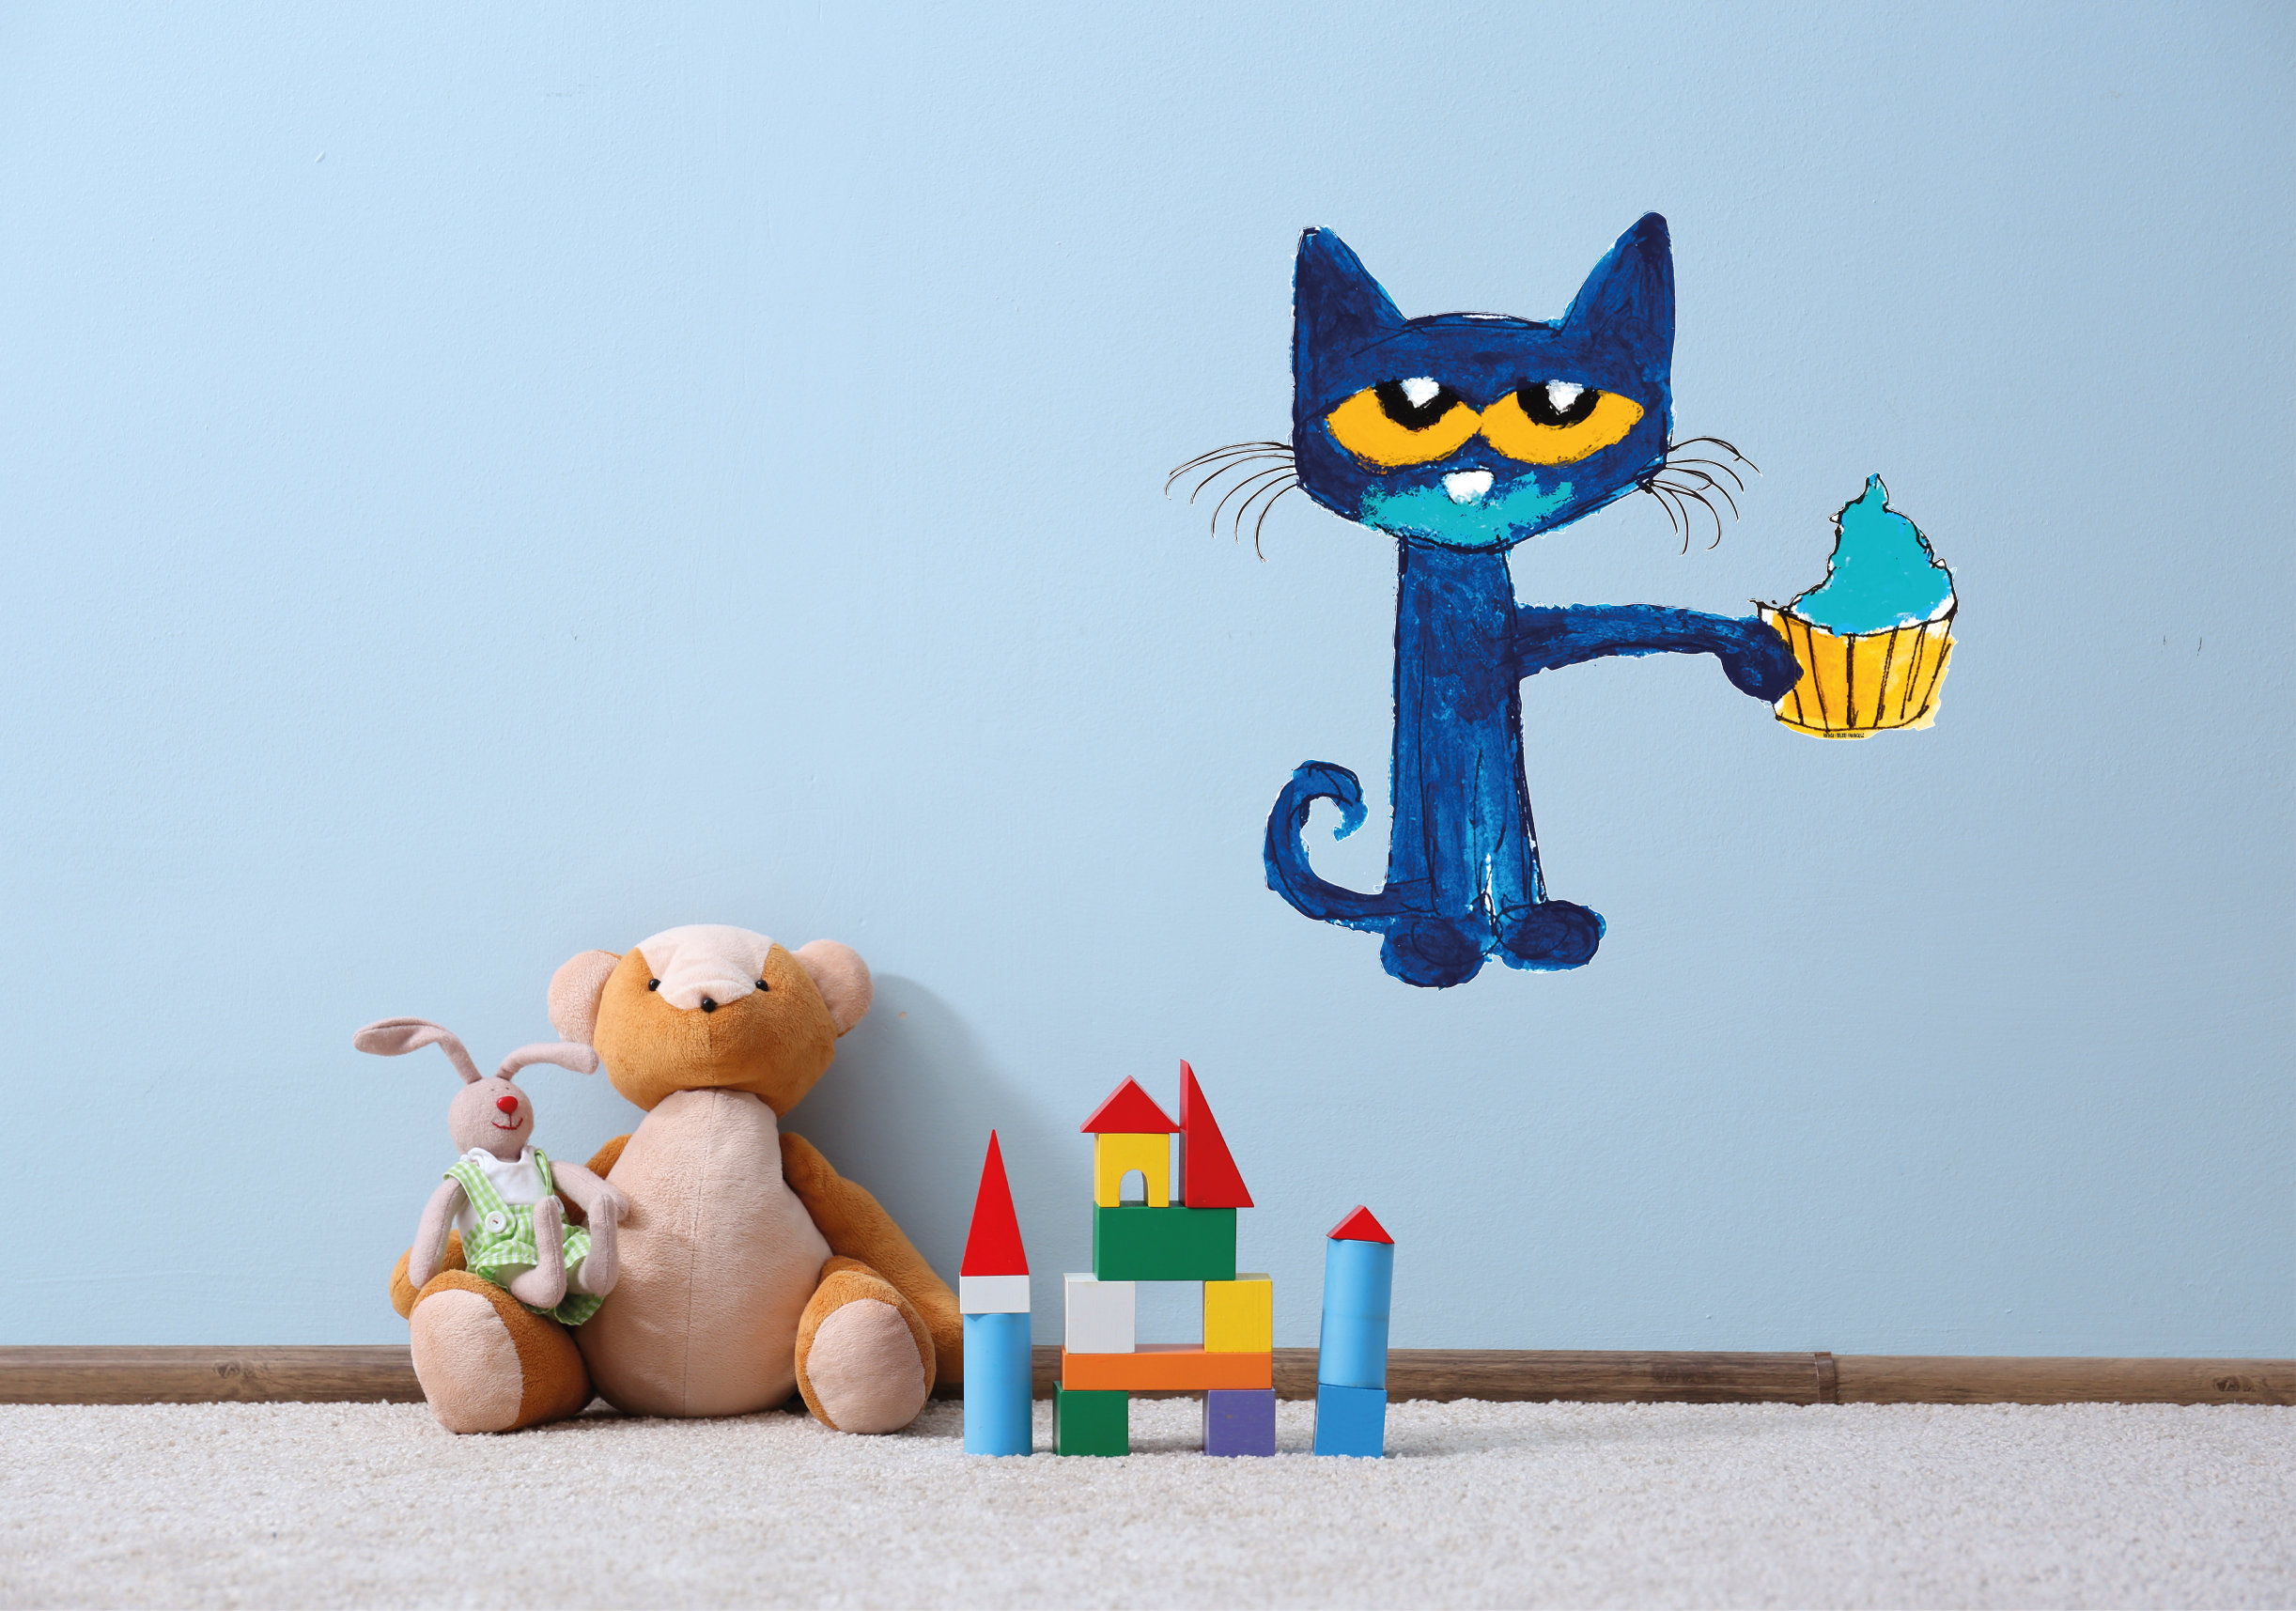 Pete the Cat Stickers